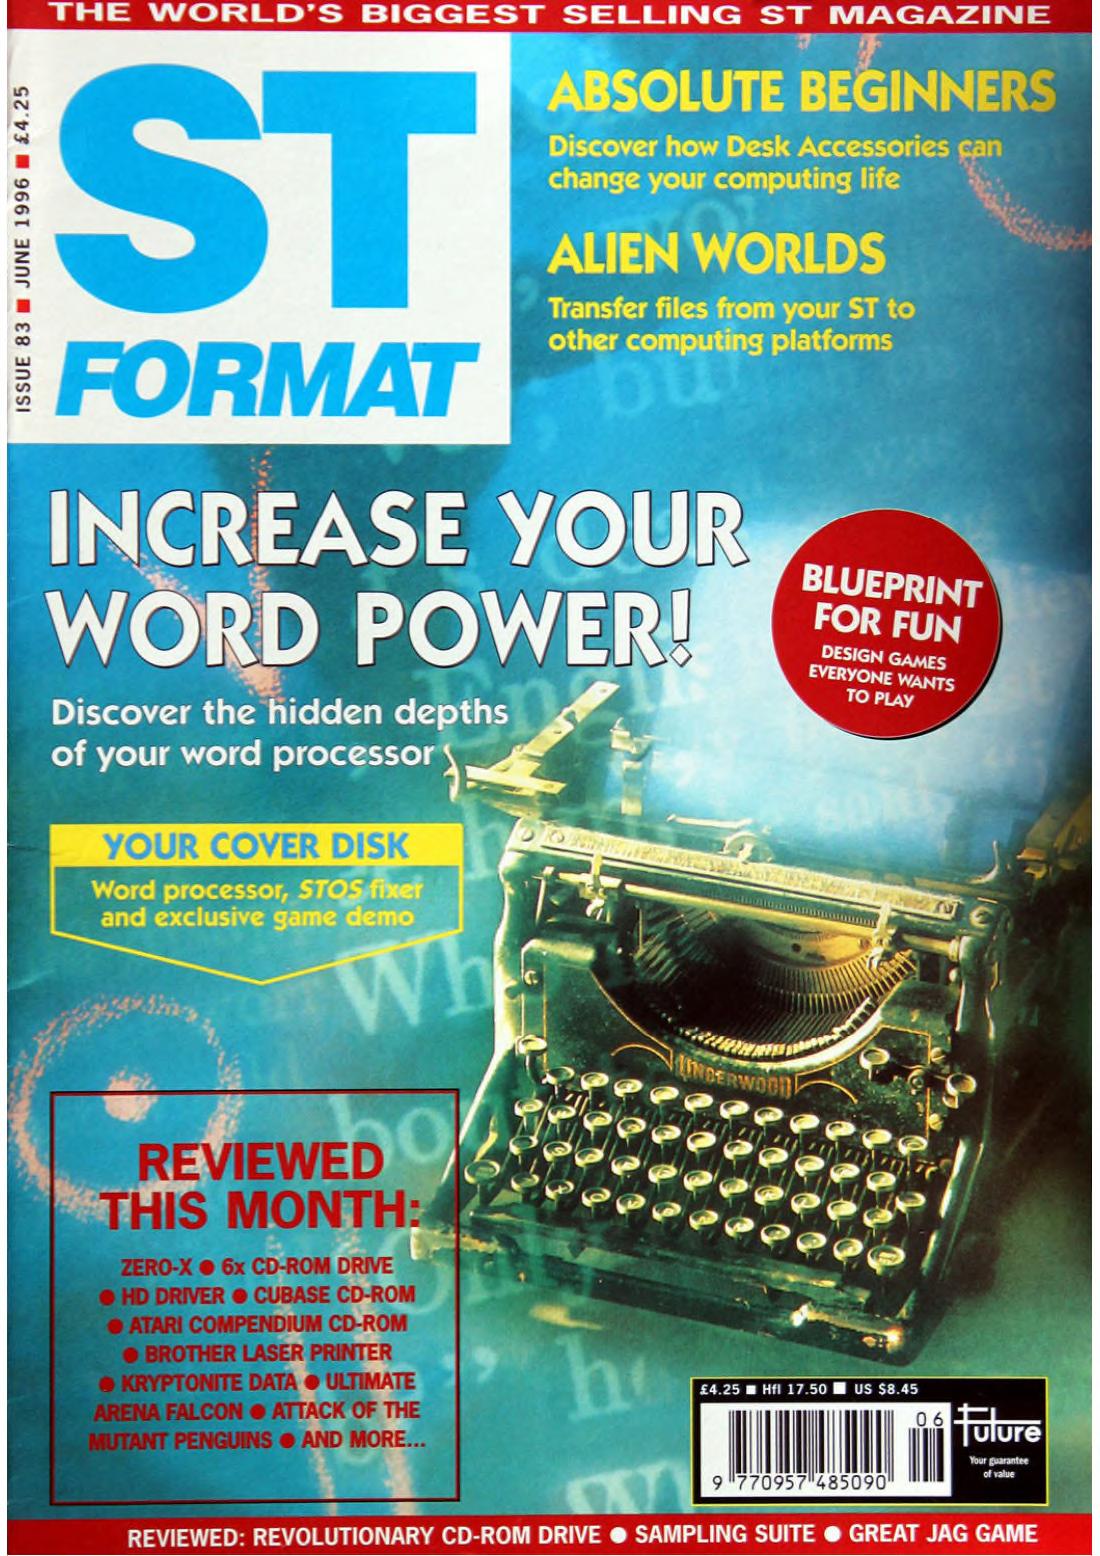 Cover for ST Format 83 (Jun 1996)